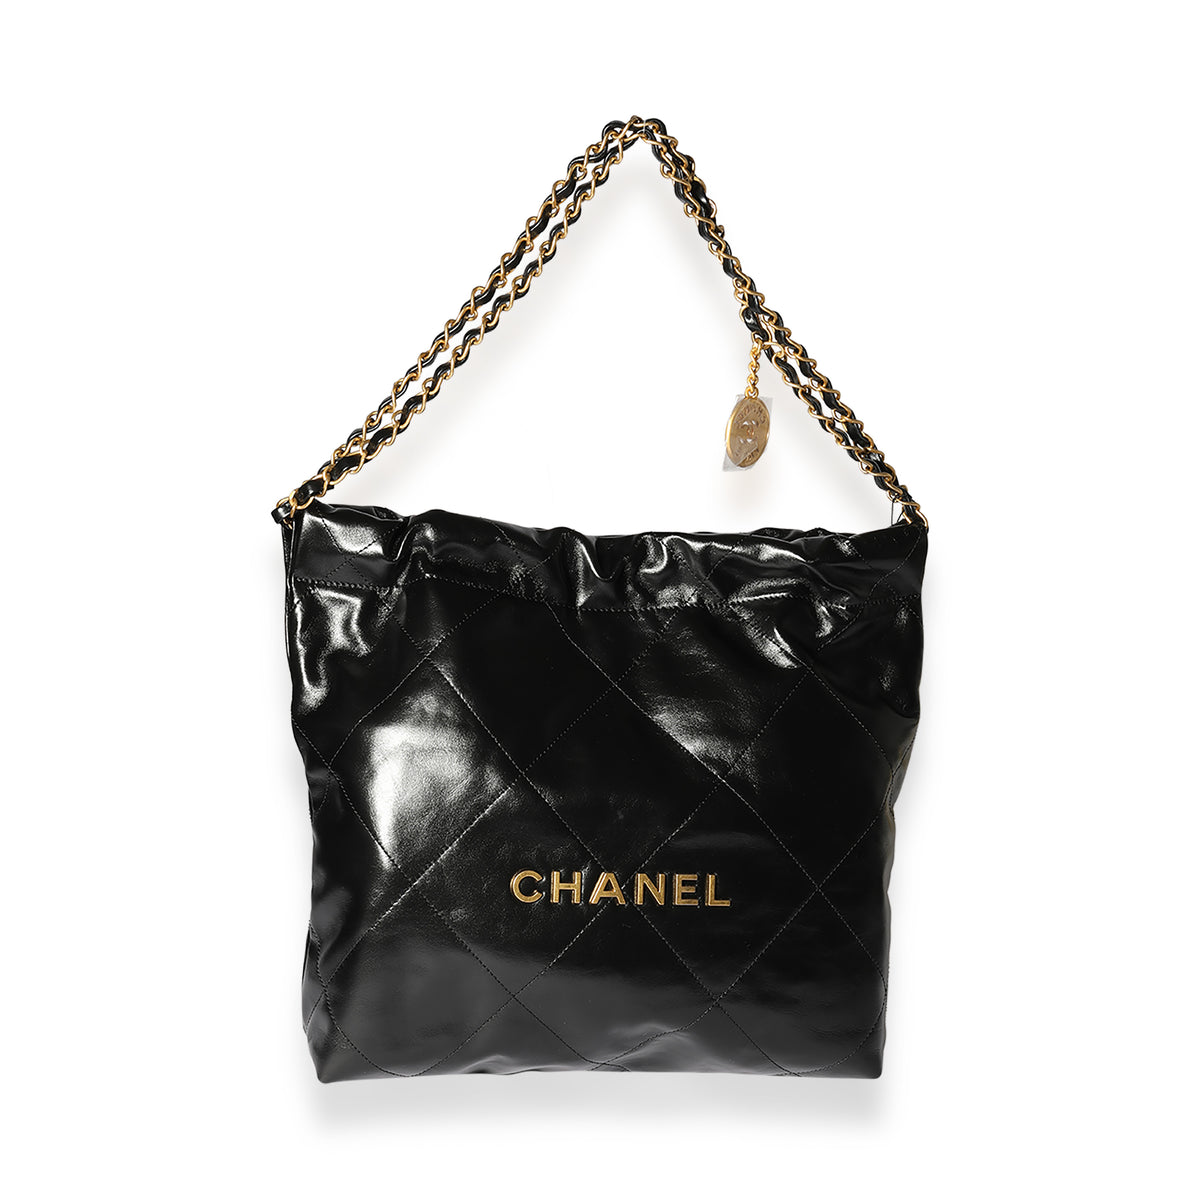 Chanel Black Quilted Shiny Calfskin Small Chanel 22 Bag, myGemma, FR